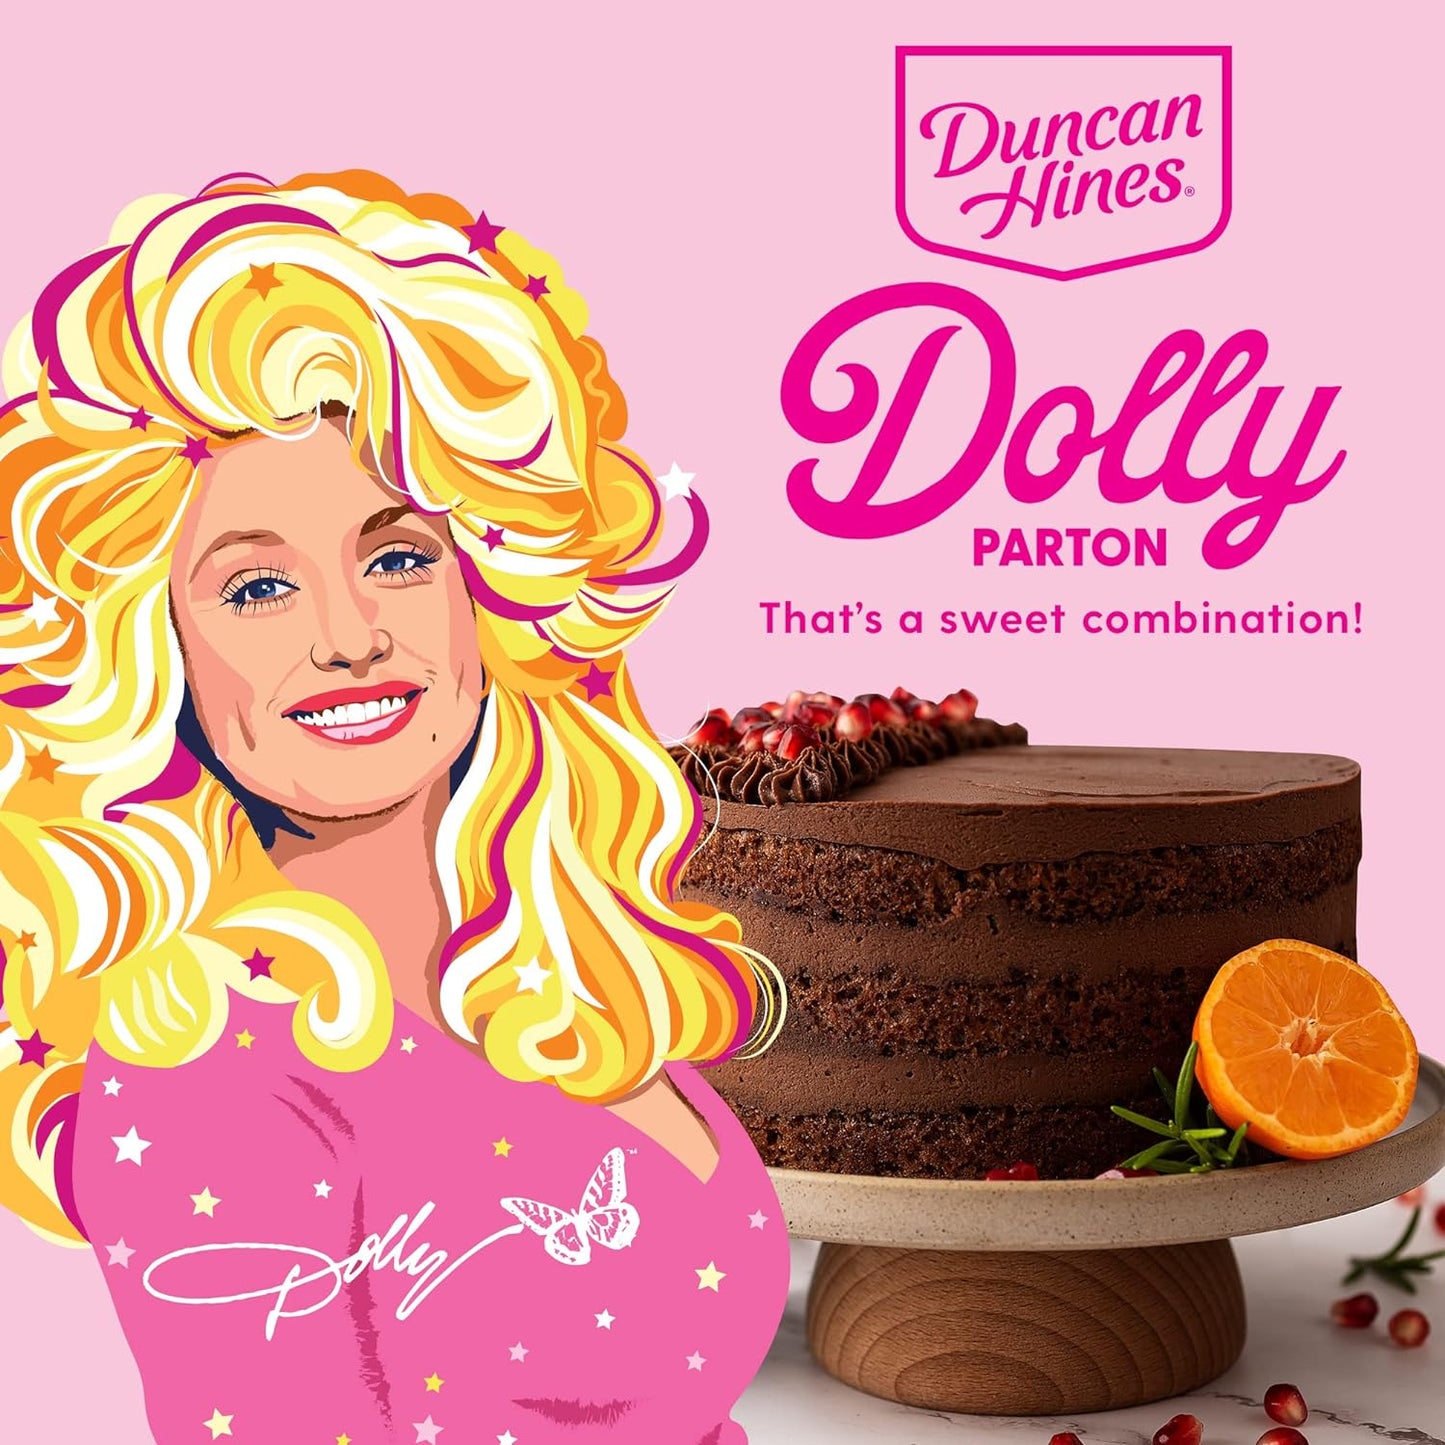 Duncan Hines Dolly Parton's Favorite Chocolate Buttercream Flavored Cake Frosting, 16 oz.